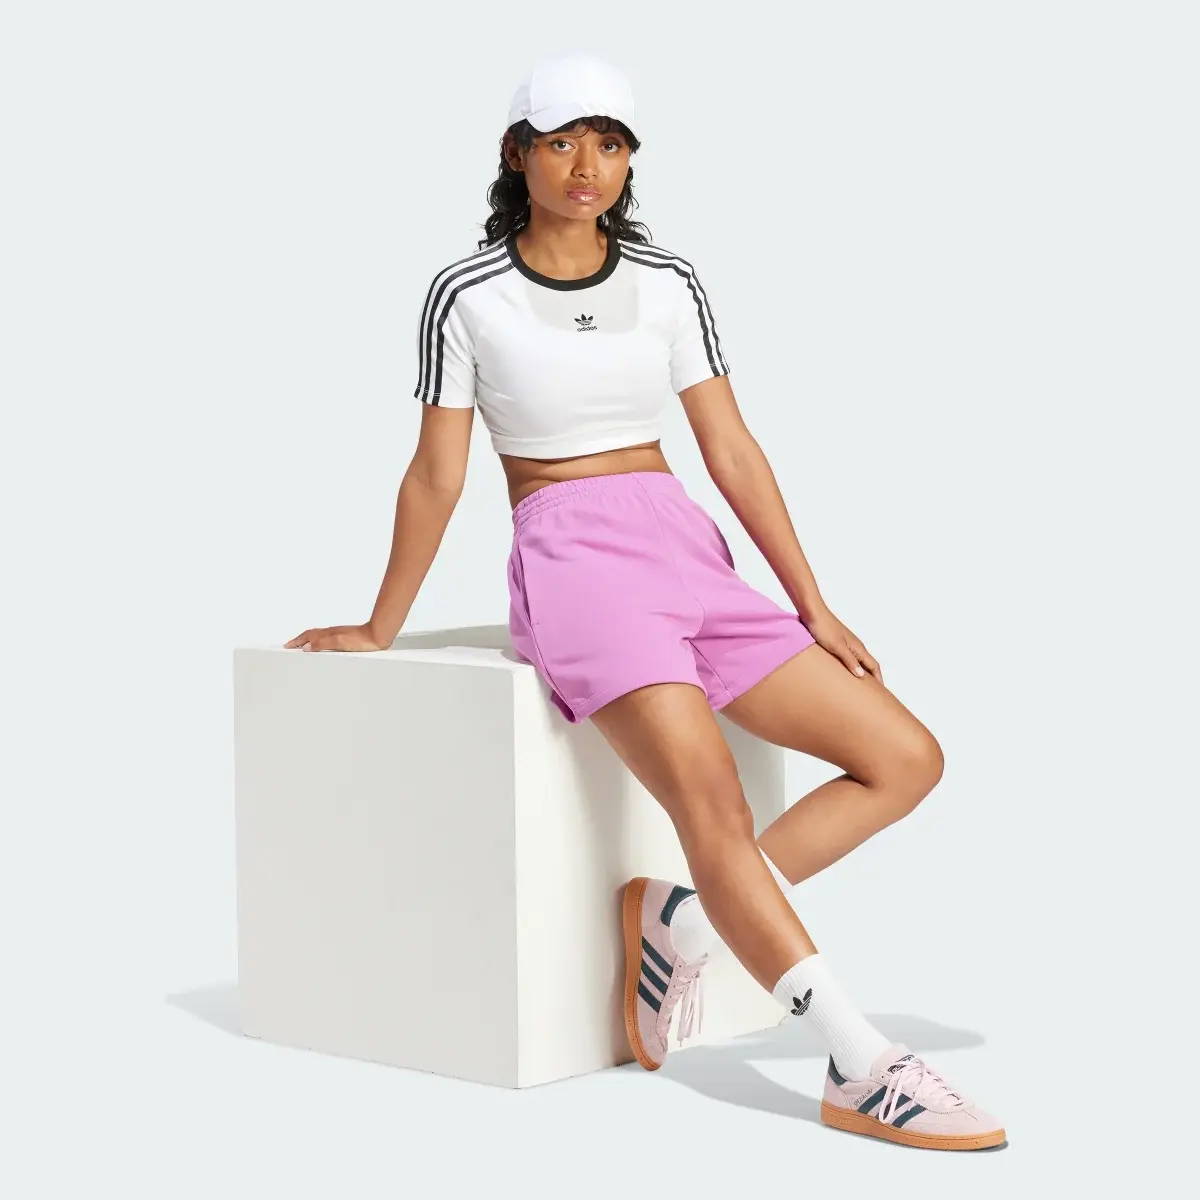 Adidas Adicolor Essentials French Terry Shorts. 3